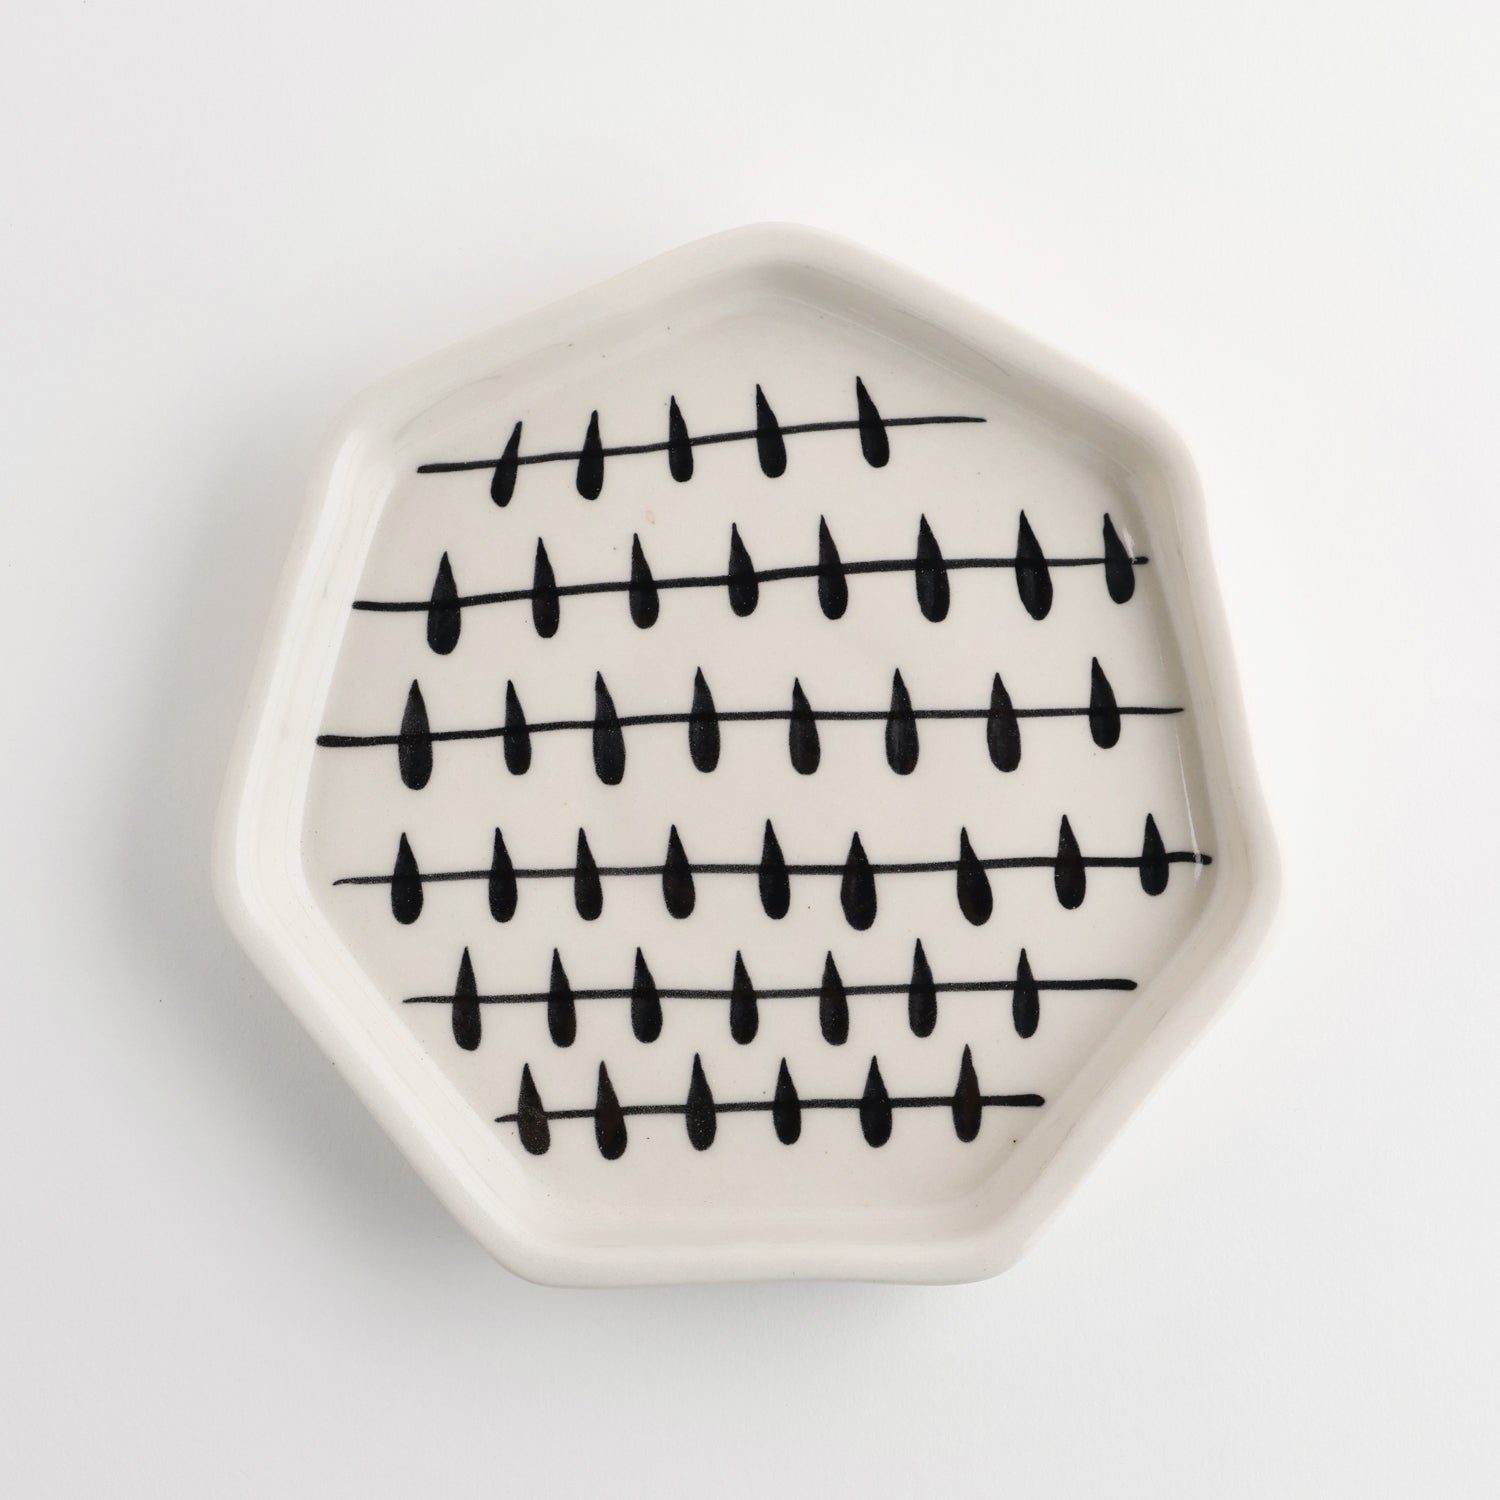 Ceramic Wired Snack Plate - Septagon 6.5 x 1